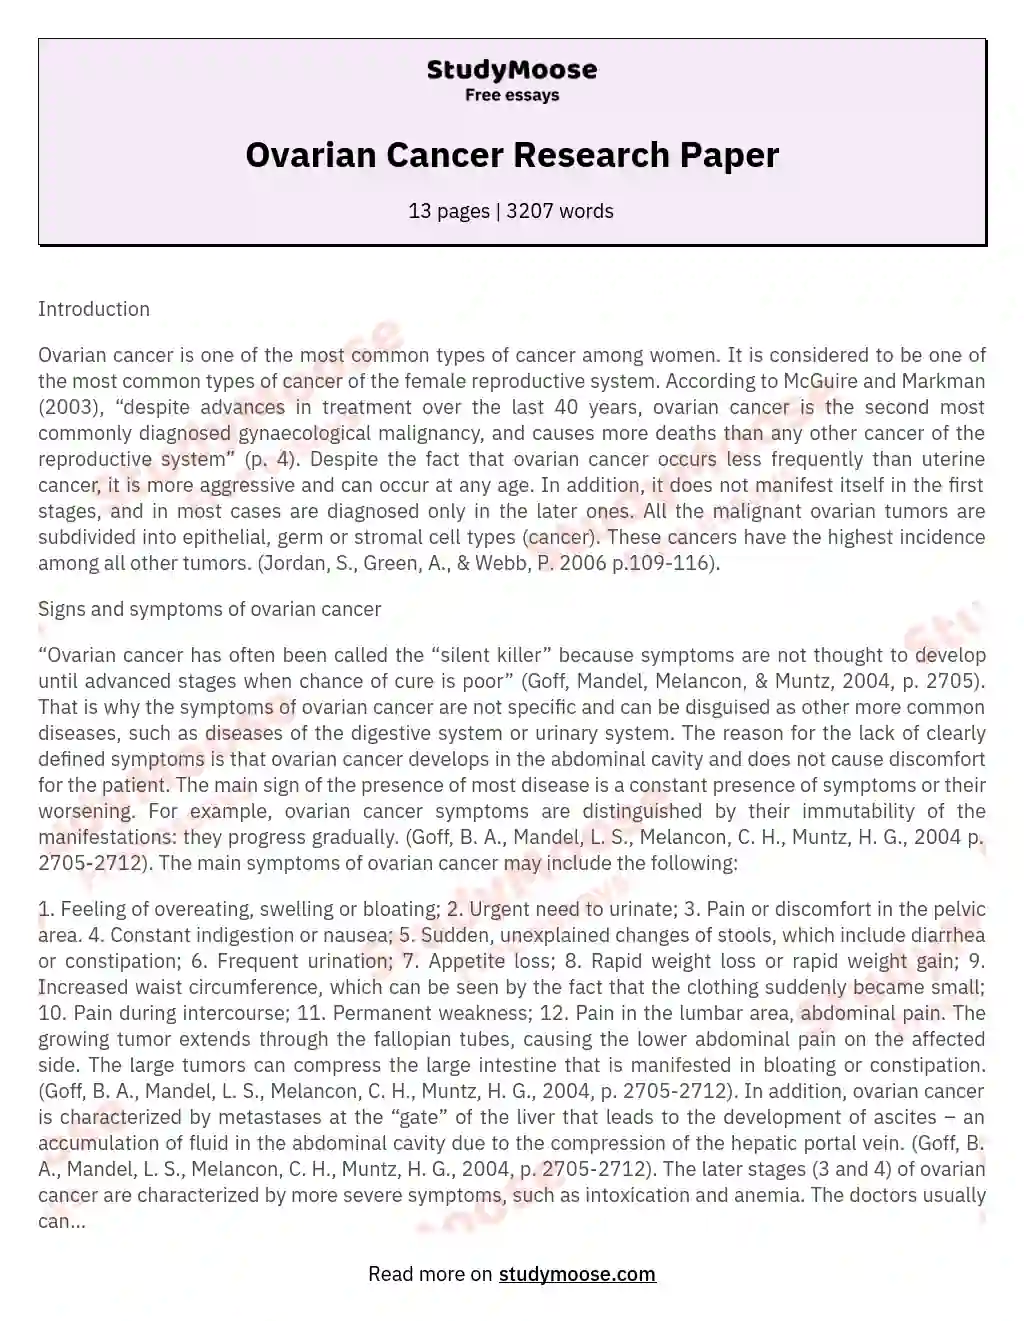 essay about ovarian cancer